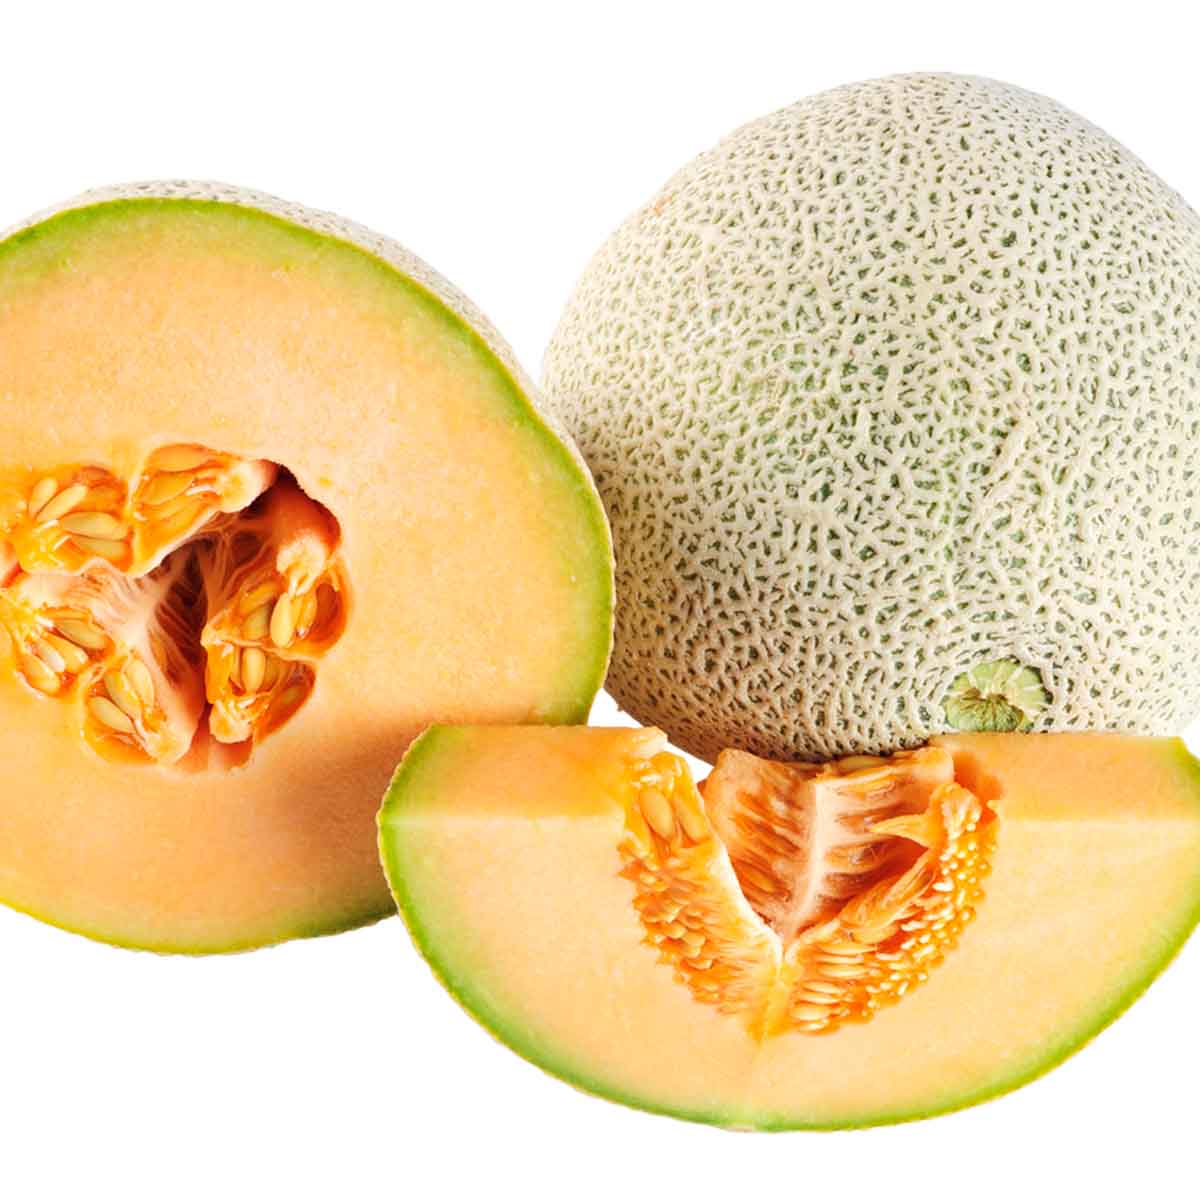 Sections of ripe cantaloupe.